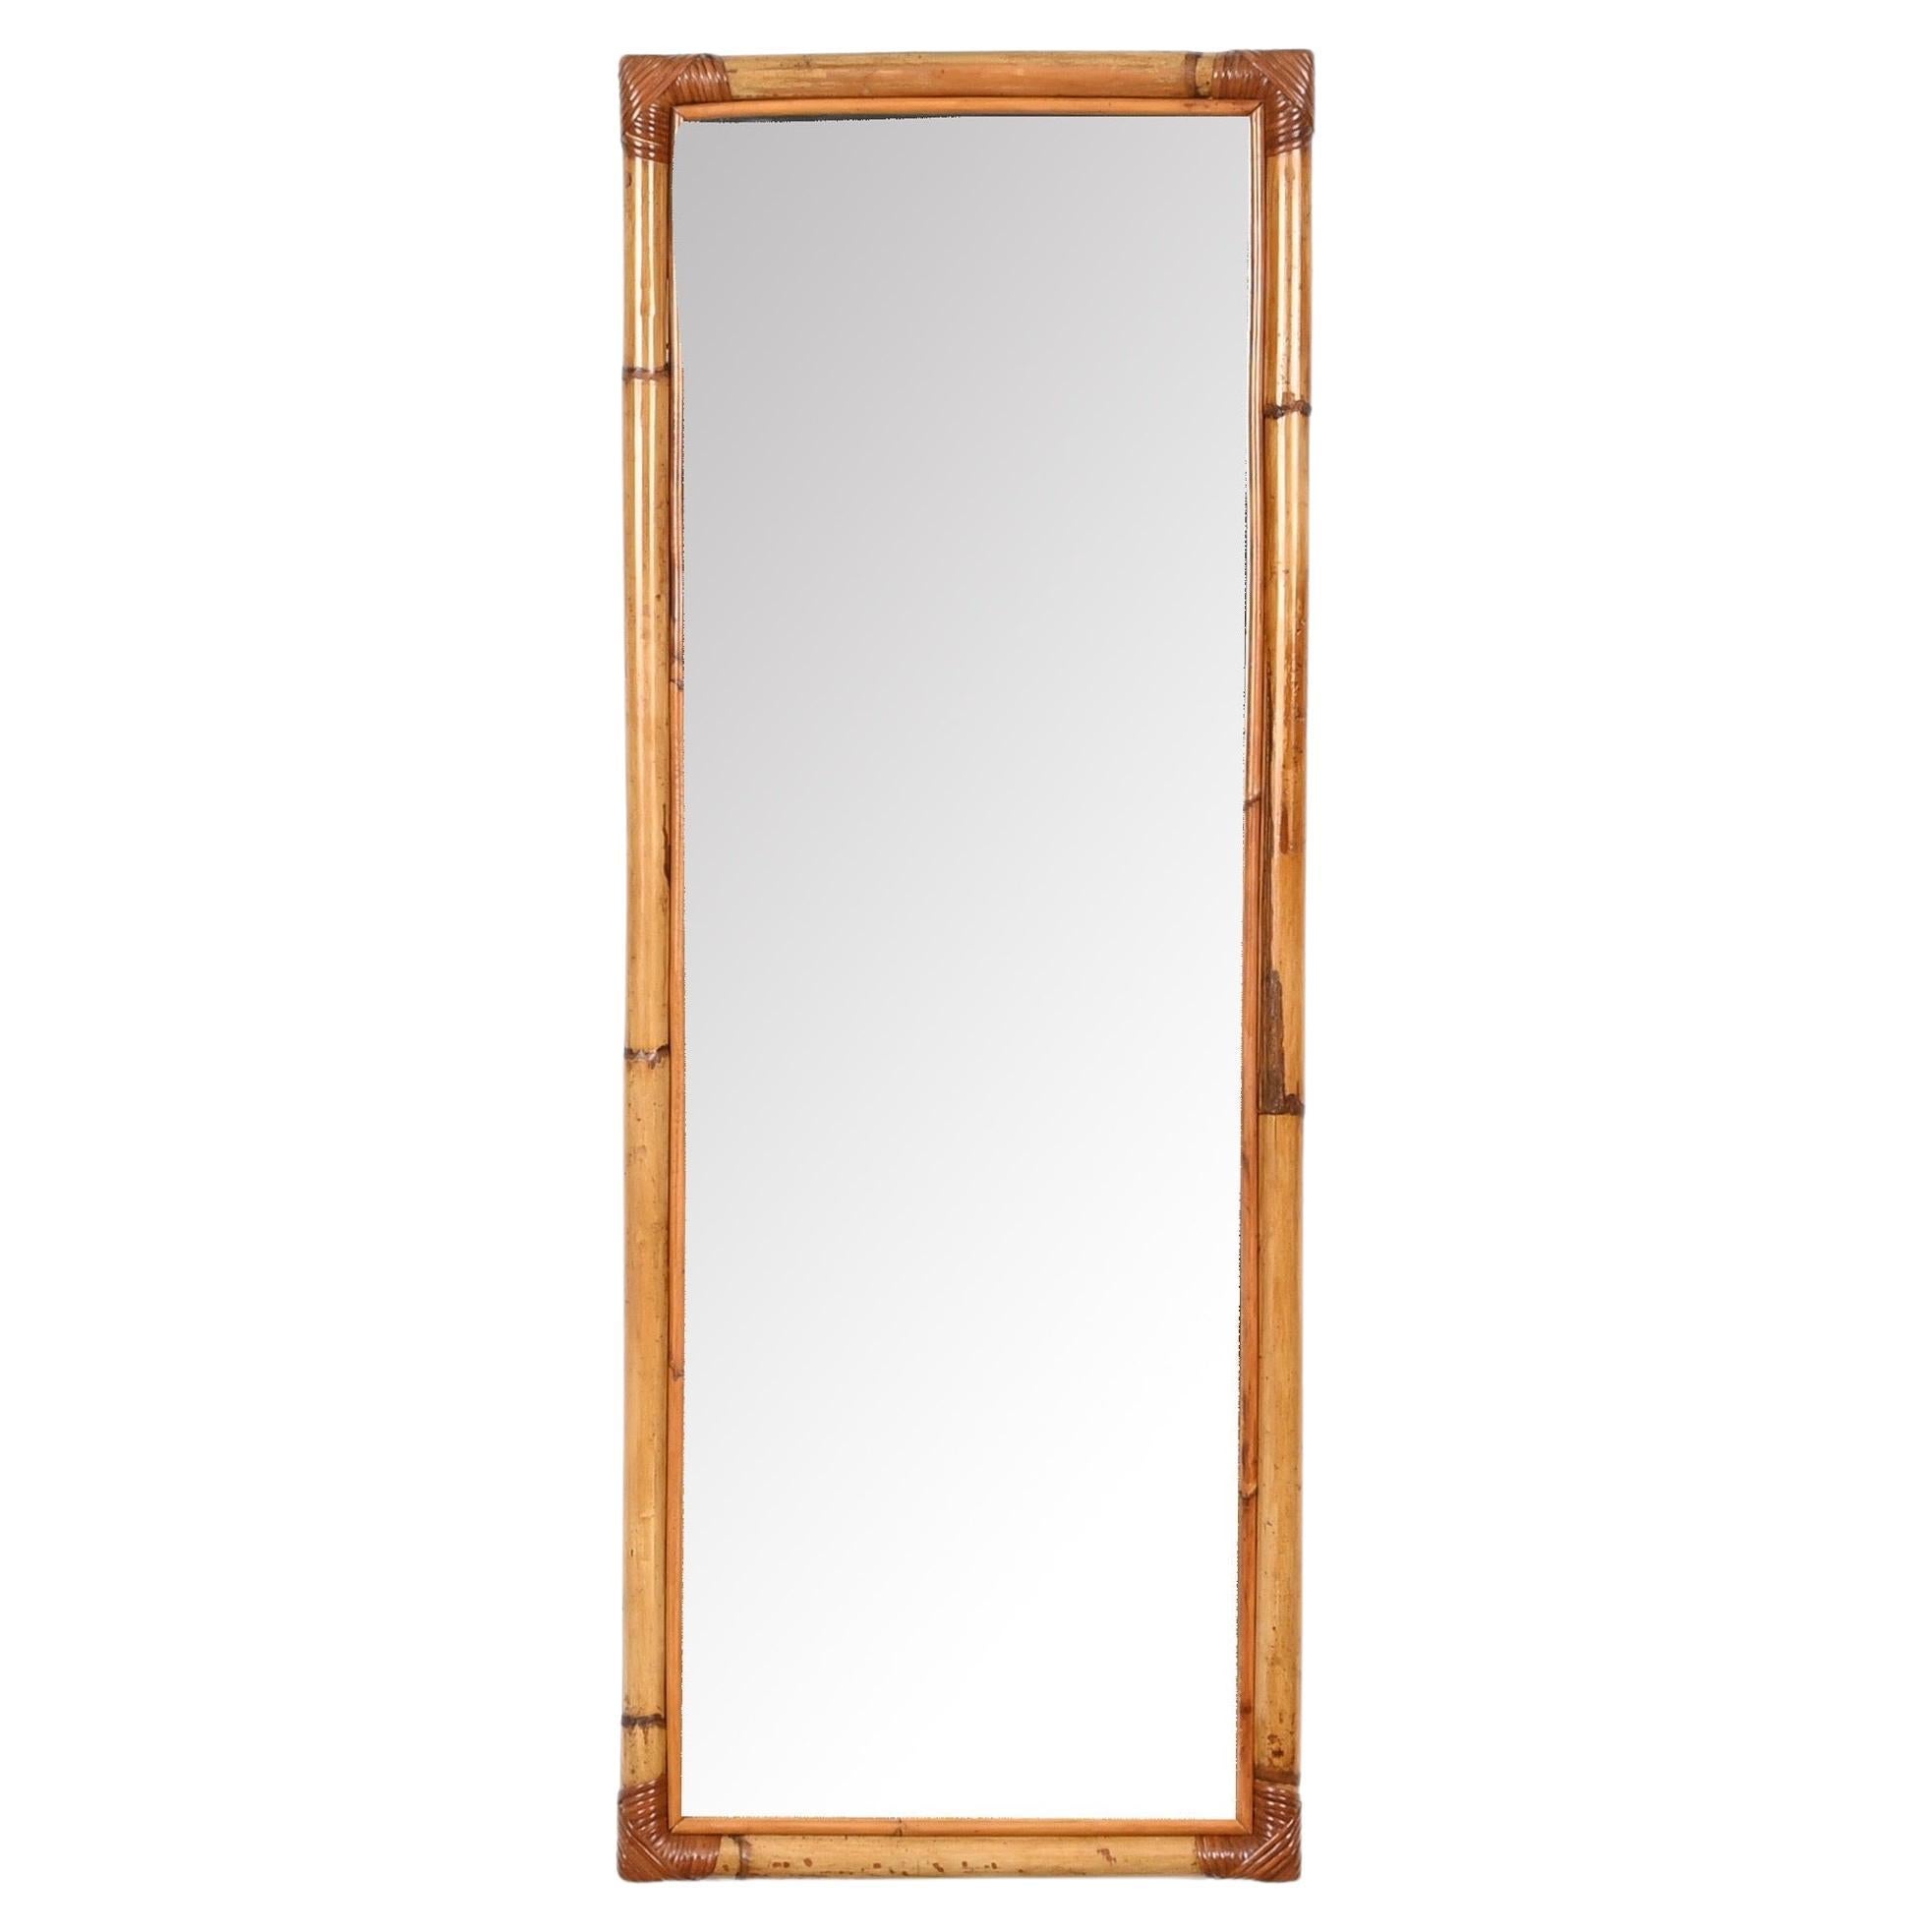 Midcentury Full Length Rectangular Mirror in Bamboo and Rattan, Italy 1970s